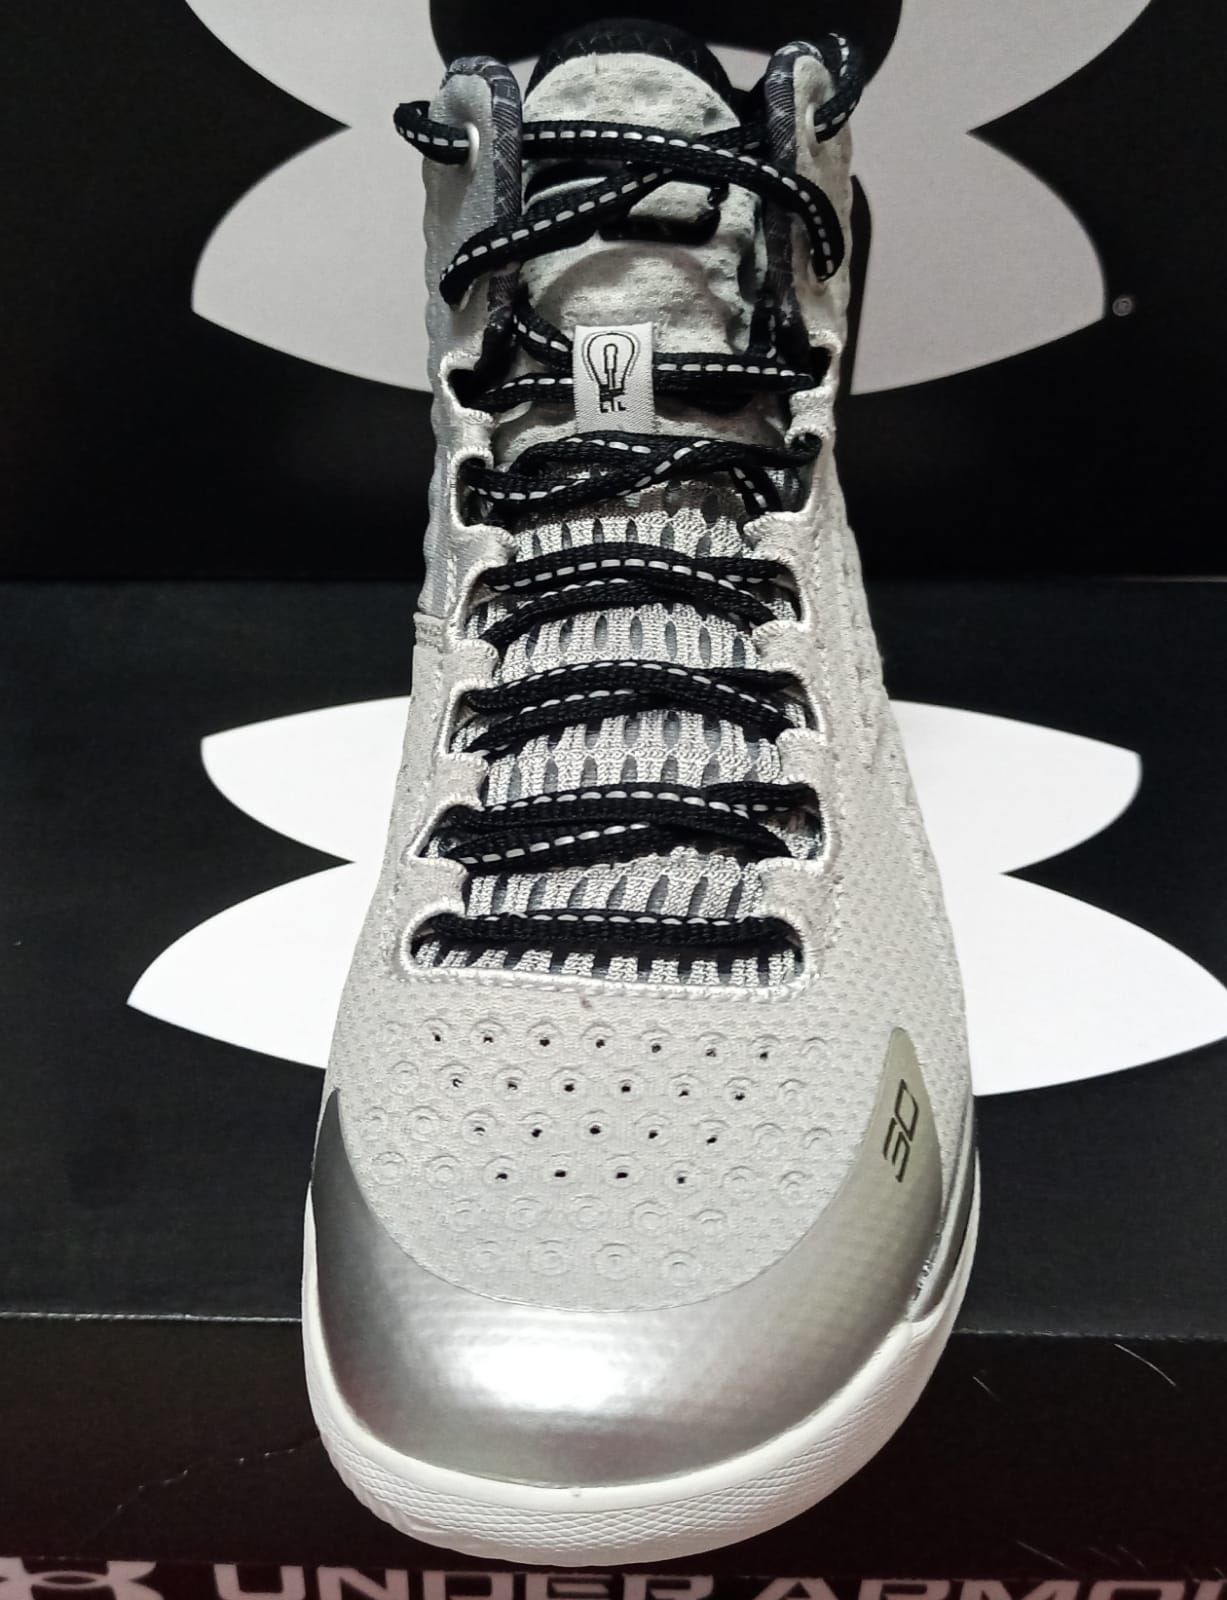 Under Armour Curry 1 Retro GS 'Black History Month'